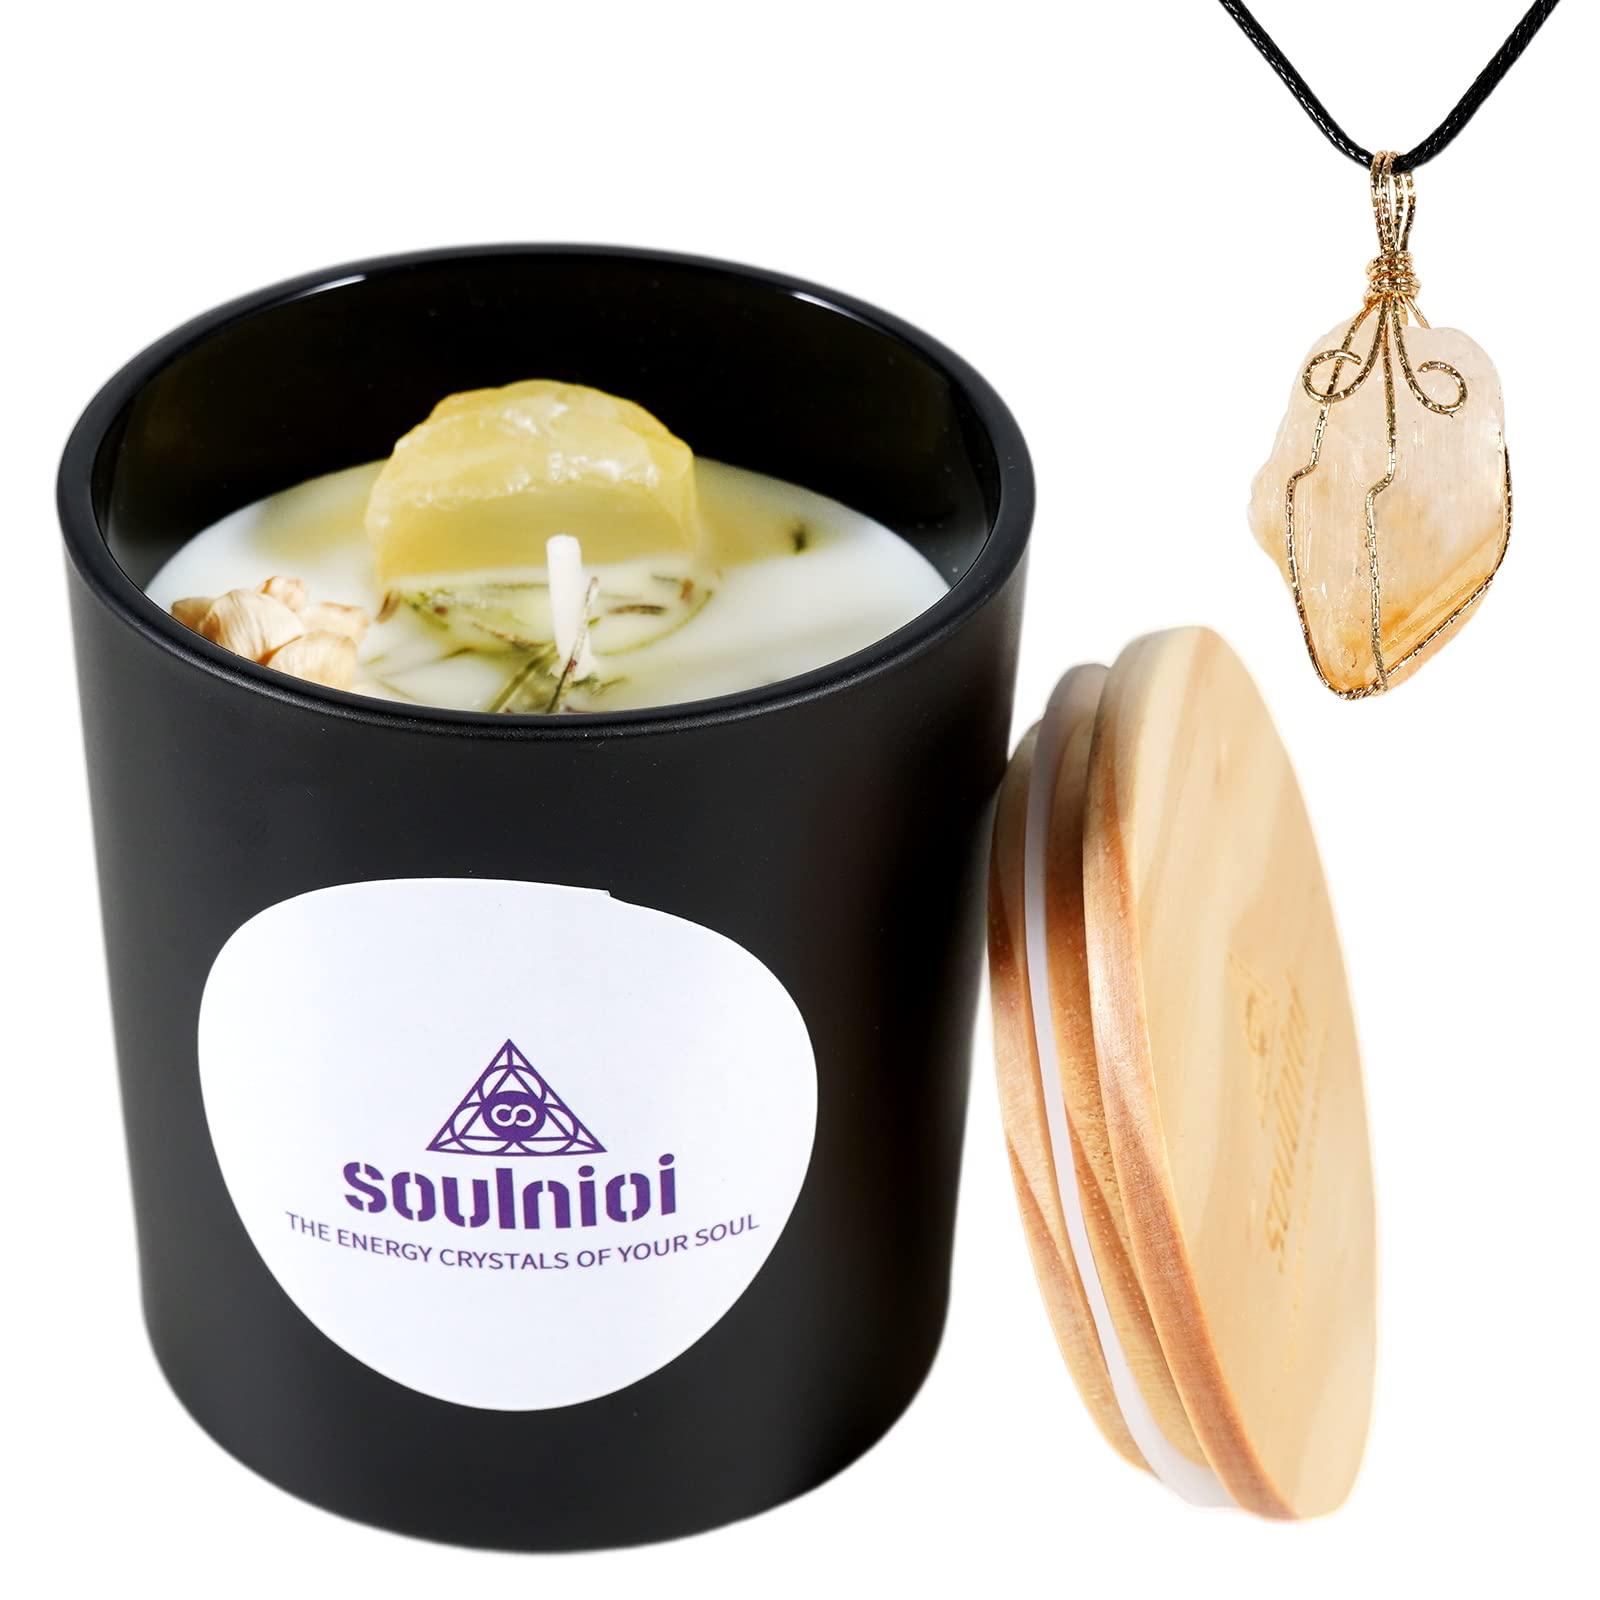 Soulnioi Scented Candle Set Black Cup Soy Wax Aromatherapy Candle with Crystal and Dry Flower Gardenia Fragrance and Citrine Crystal Pendant Necklace of Stress Realxtion for Wedding Birthday Gift